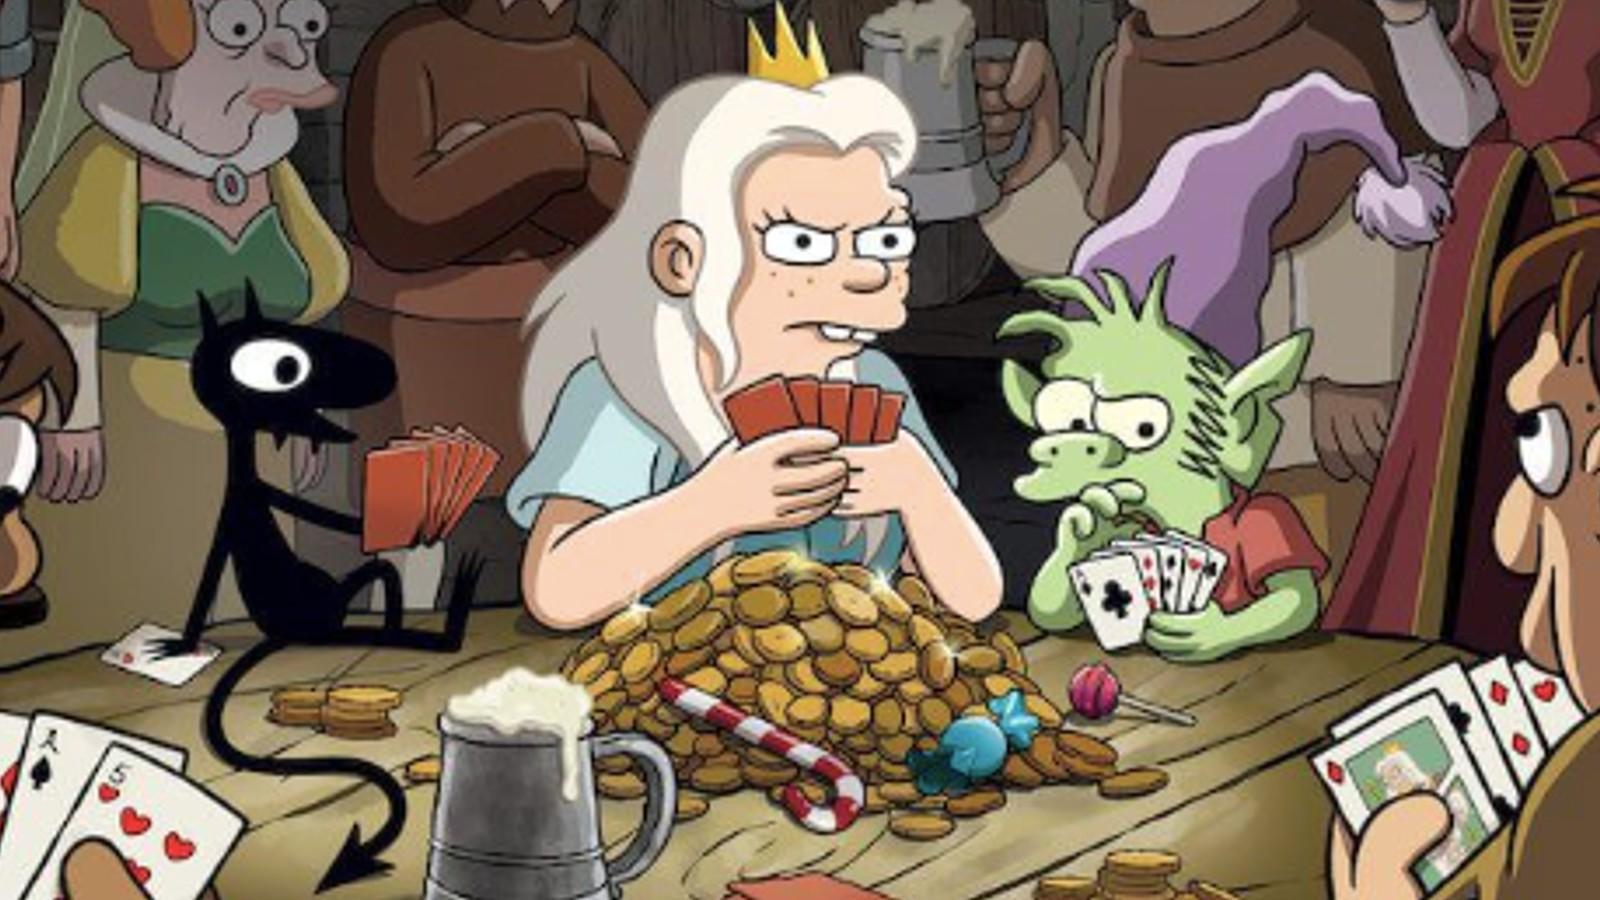 Princess Bean and her demon Luci in Disenchantment